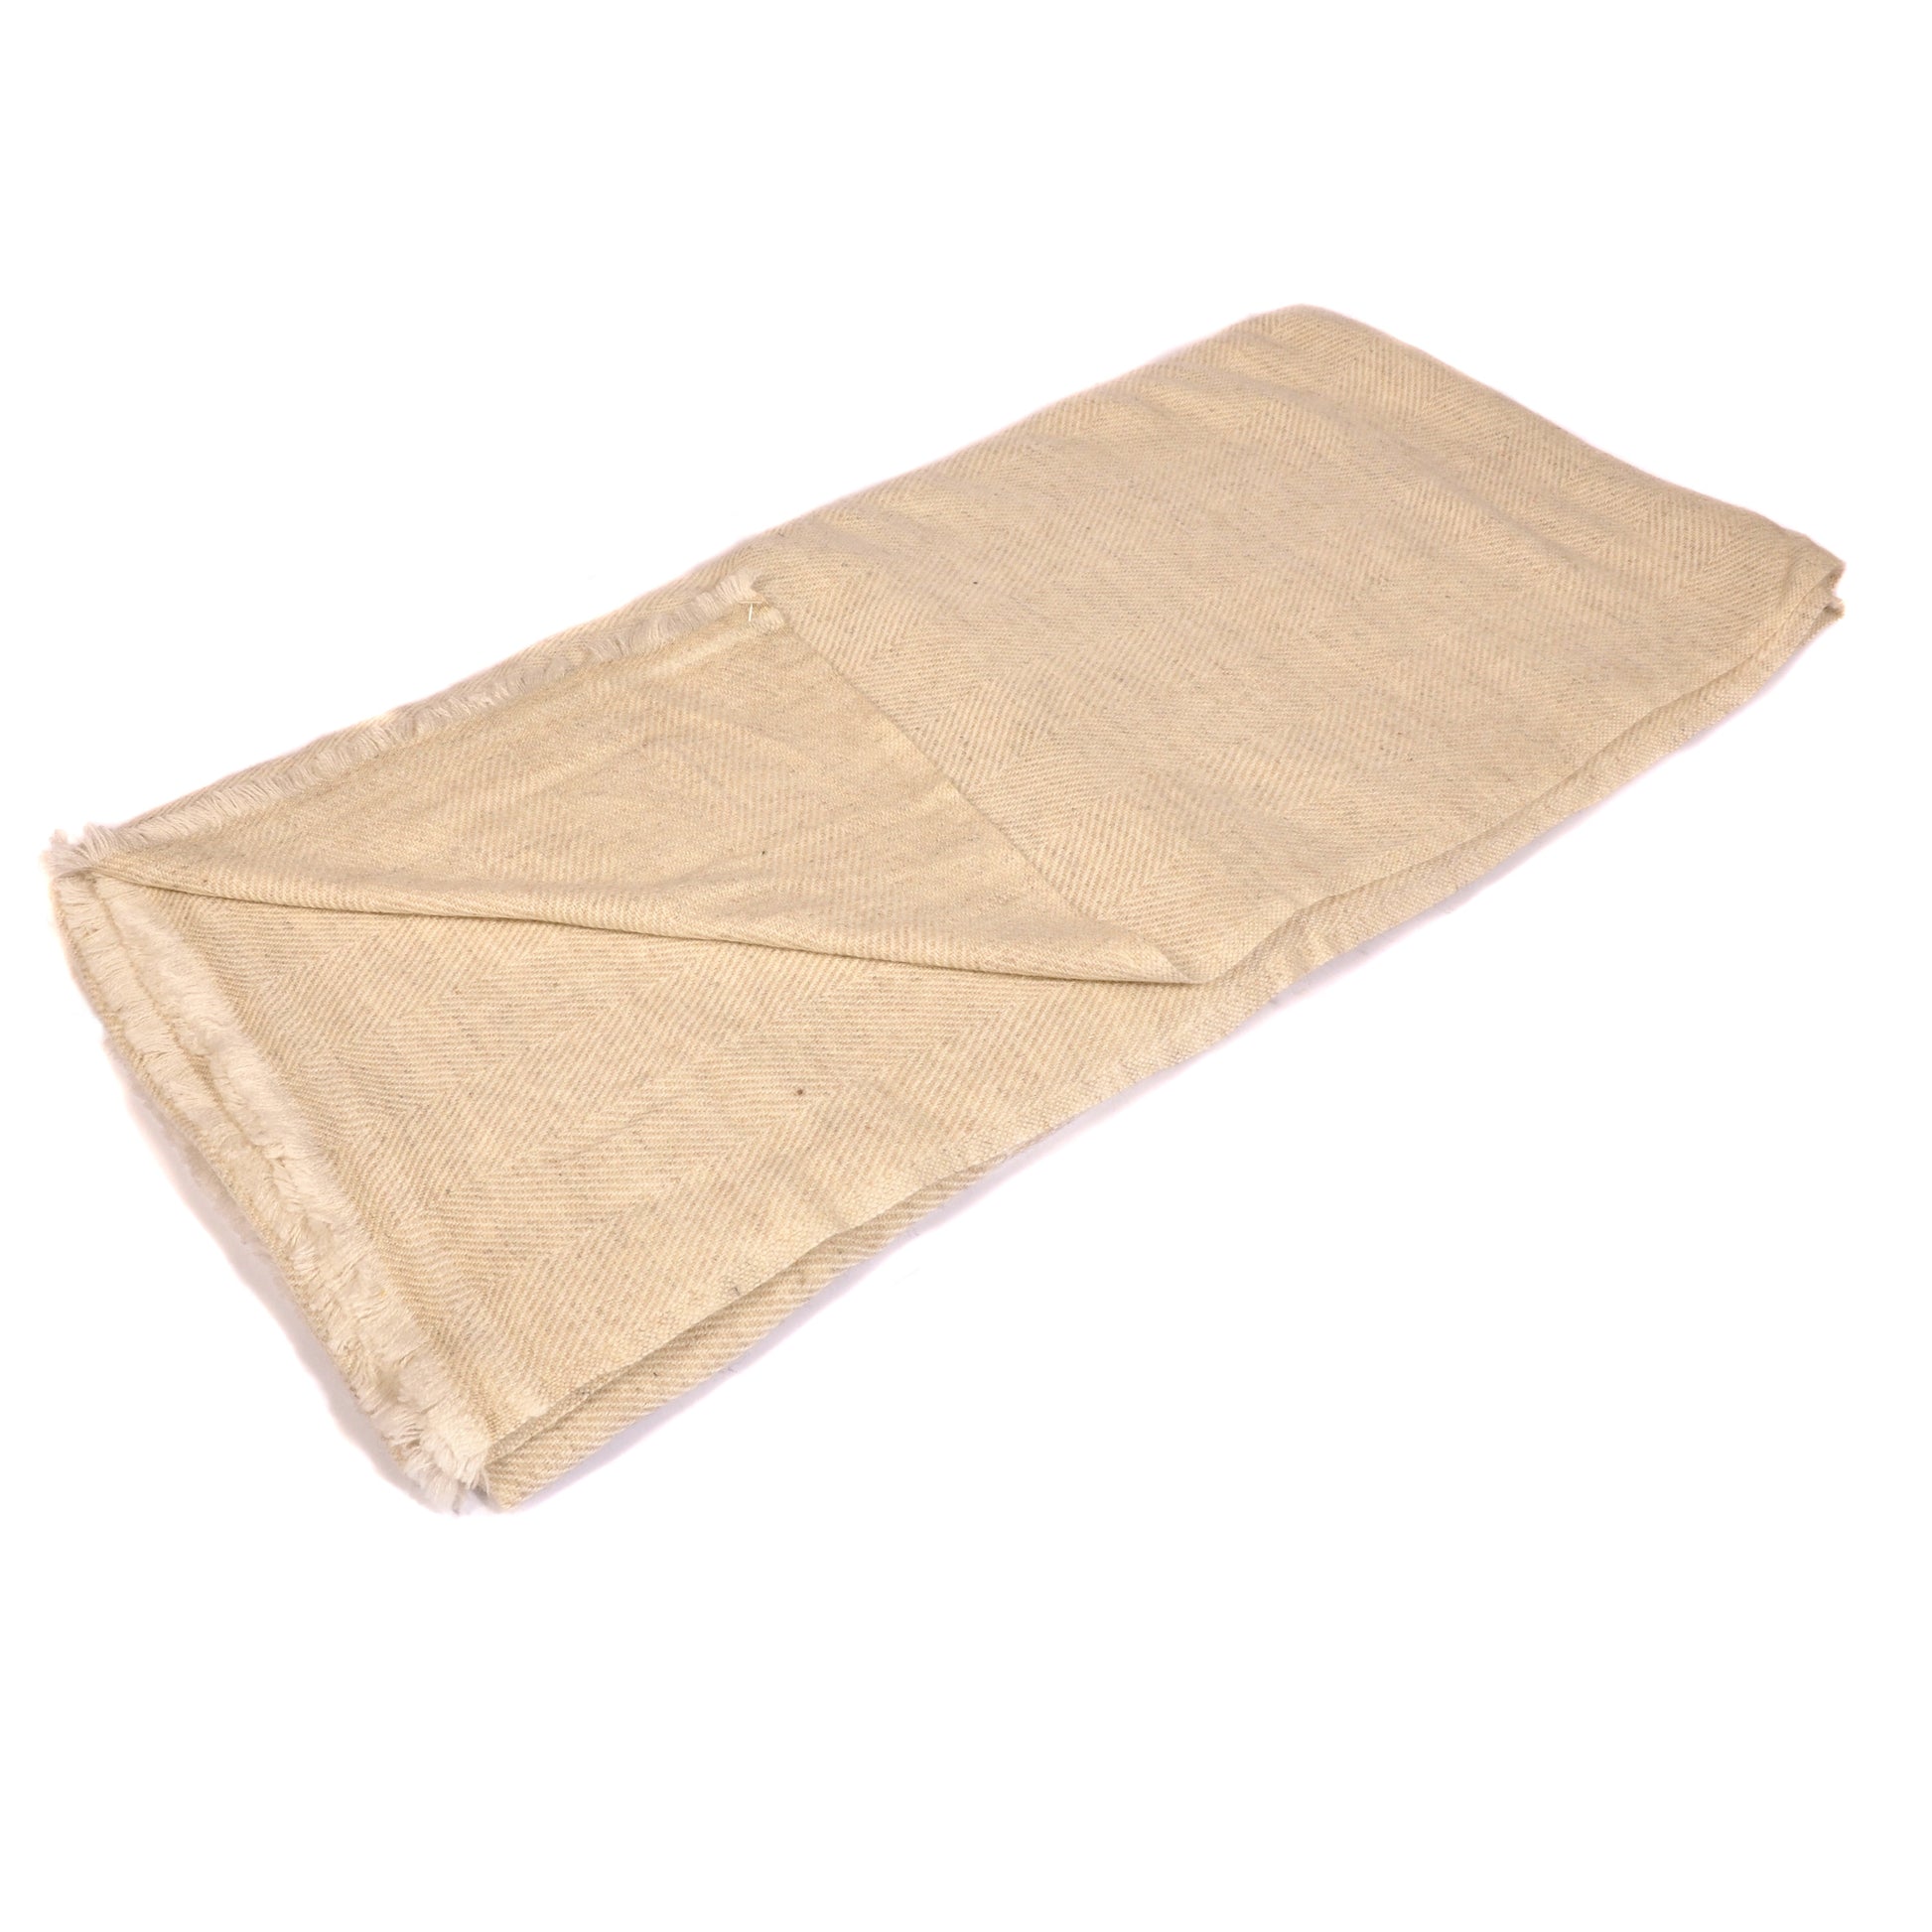 Oatmeal Cashmere Throw Not specified